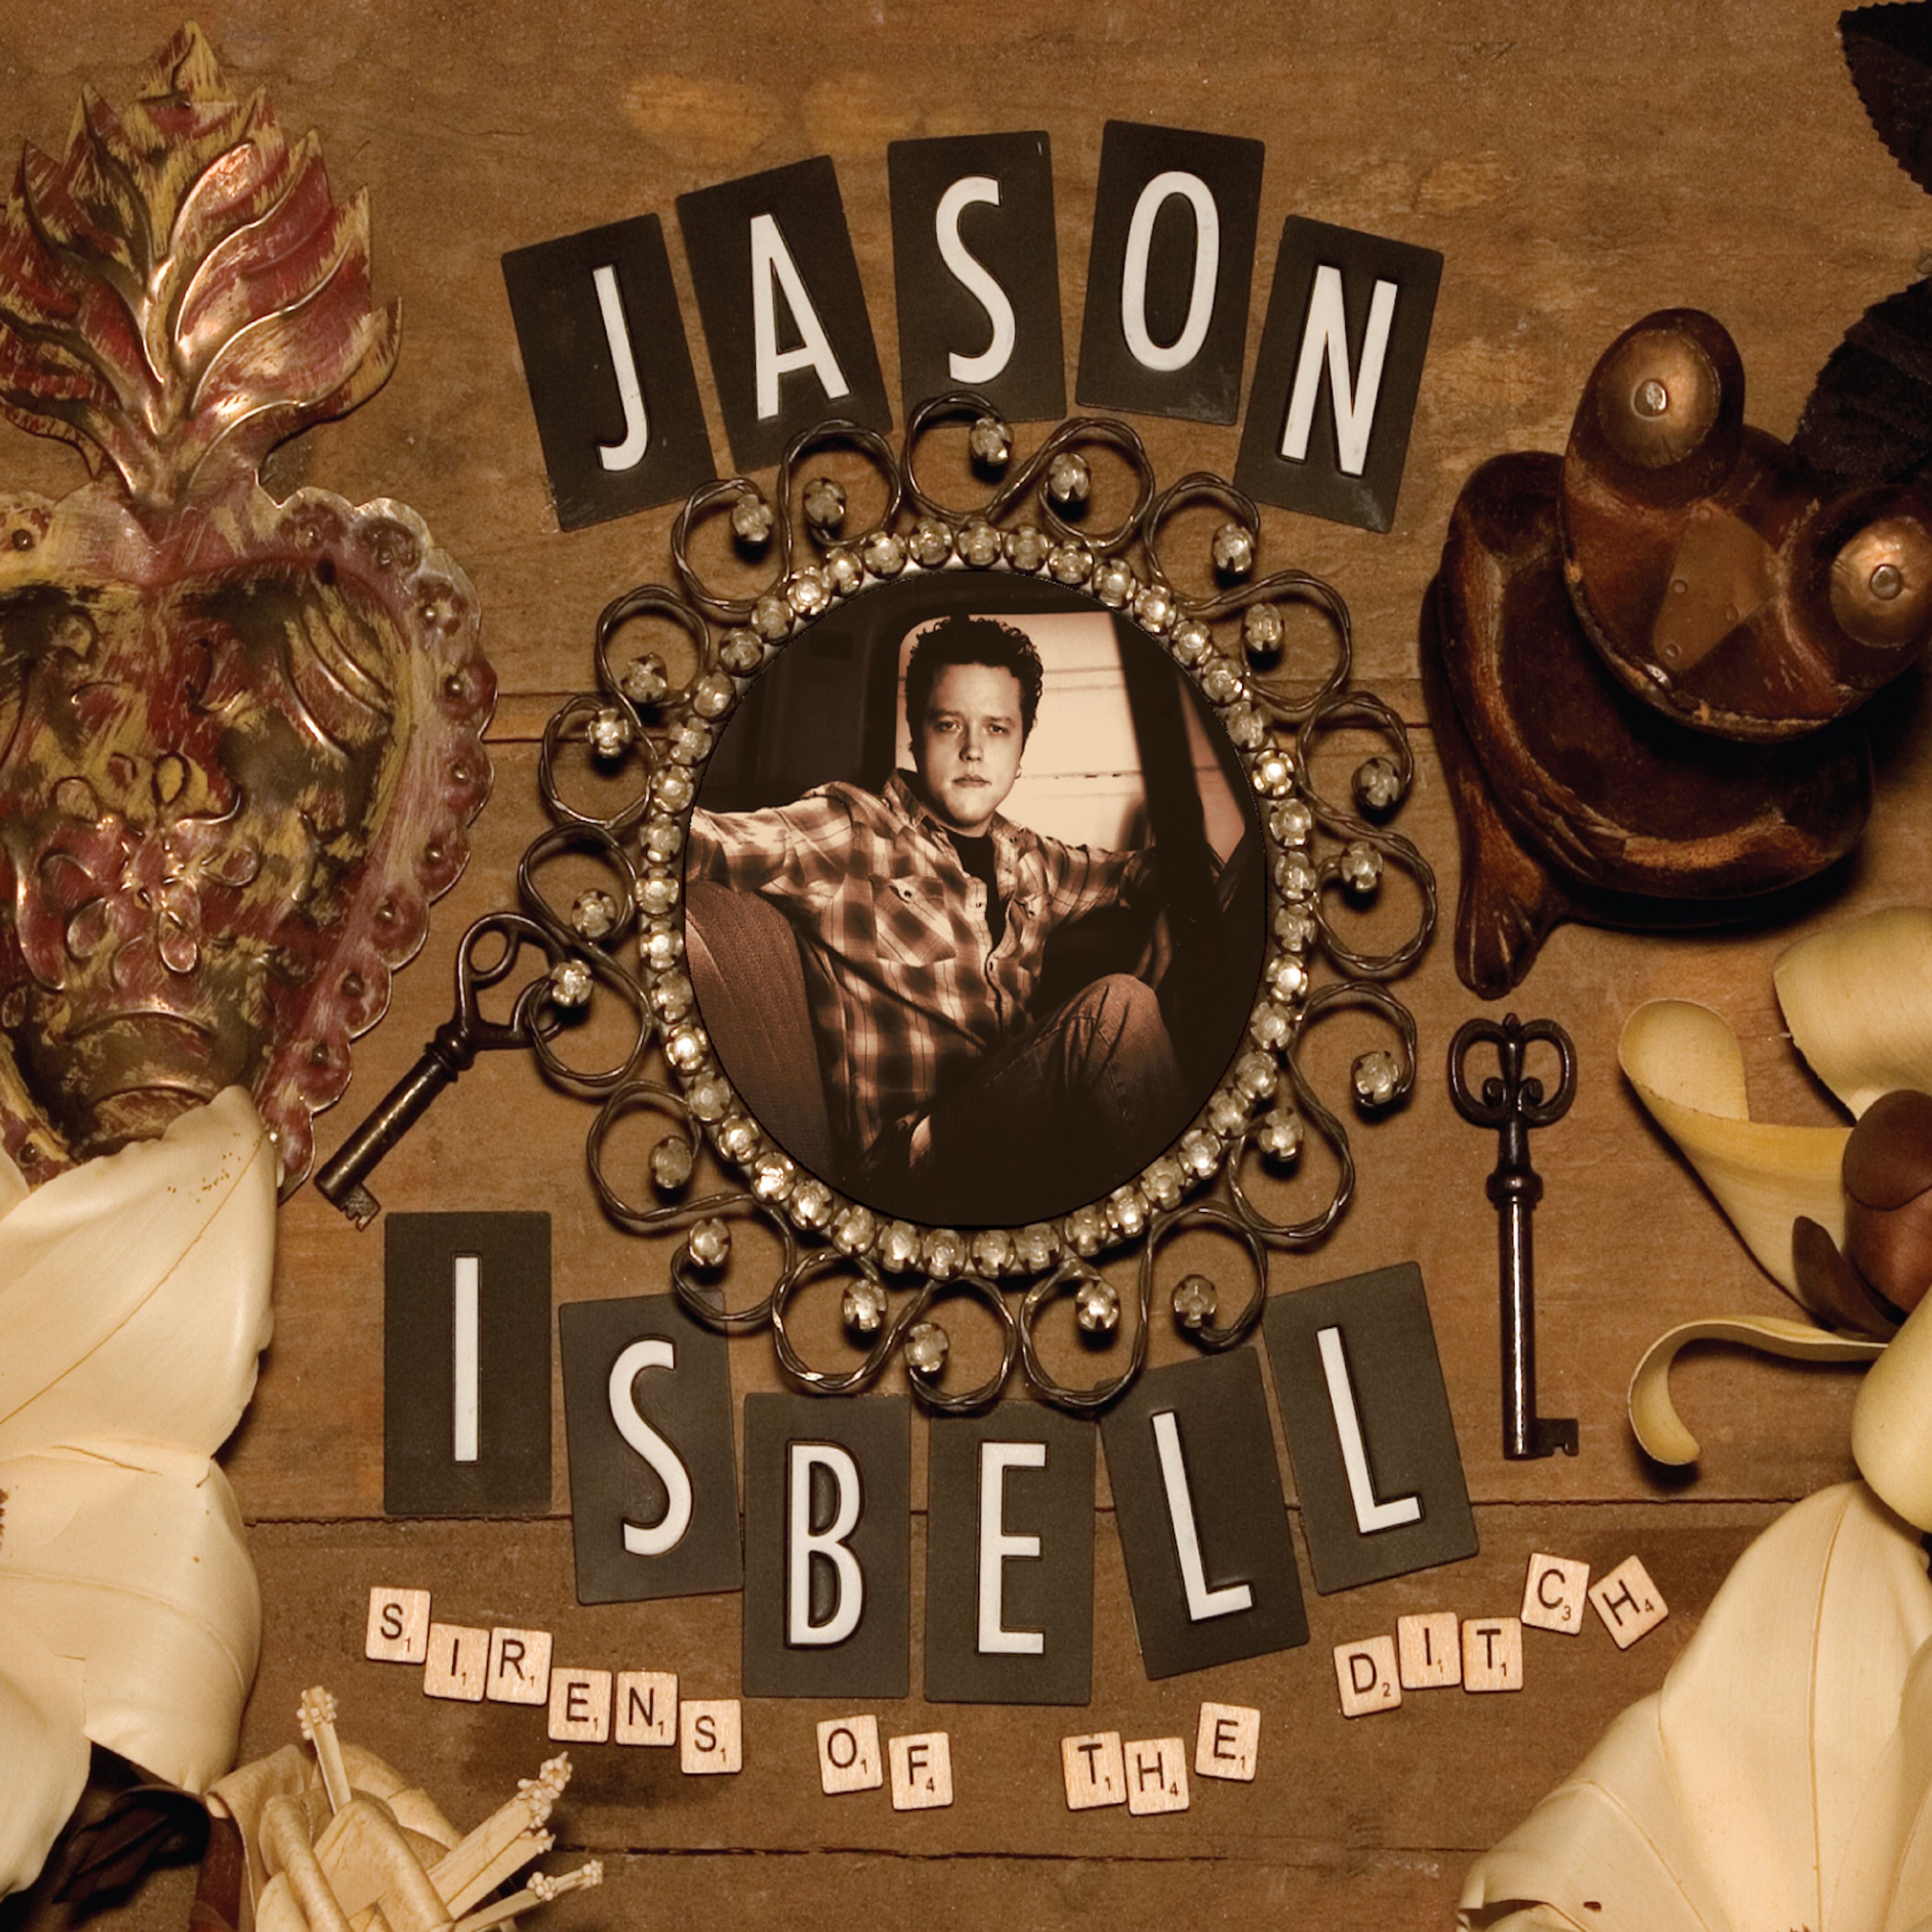 Jason Isbell - Sirens Of The Ditch [Deluxe Edition]